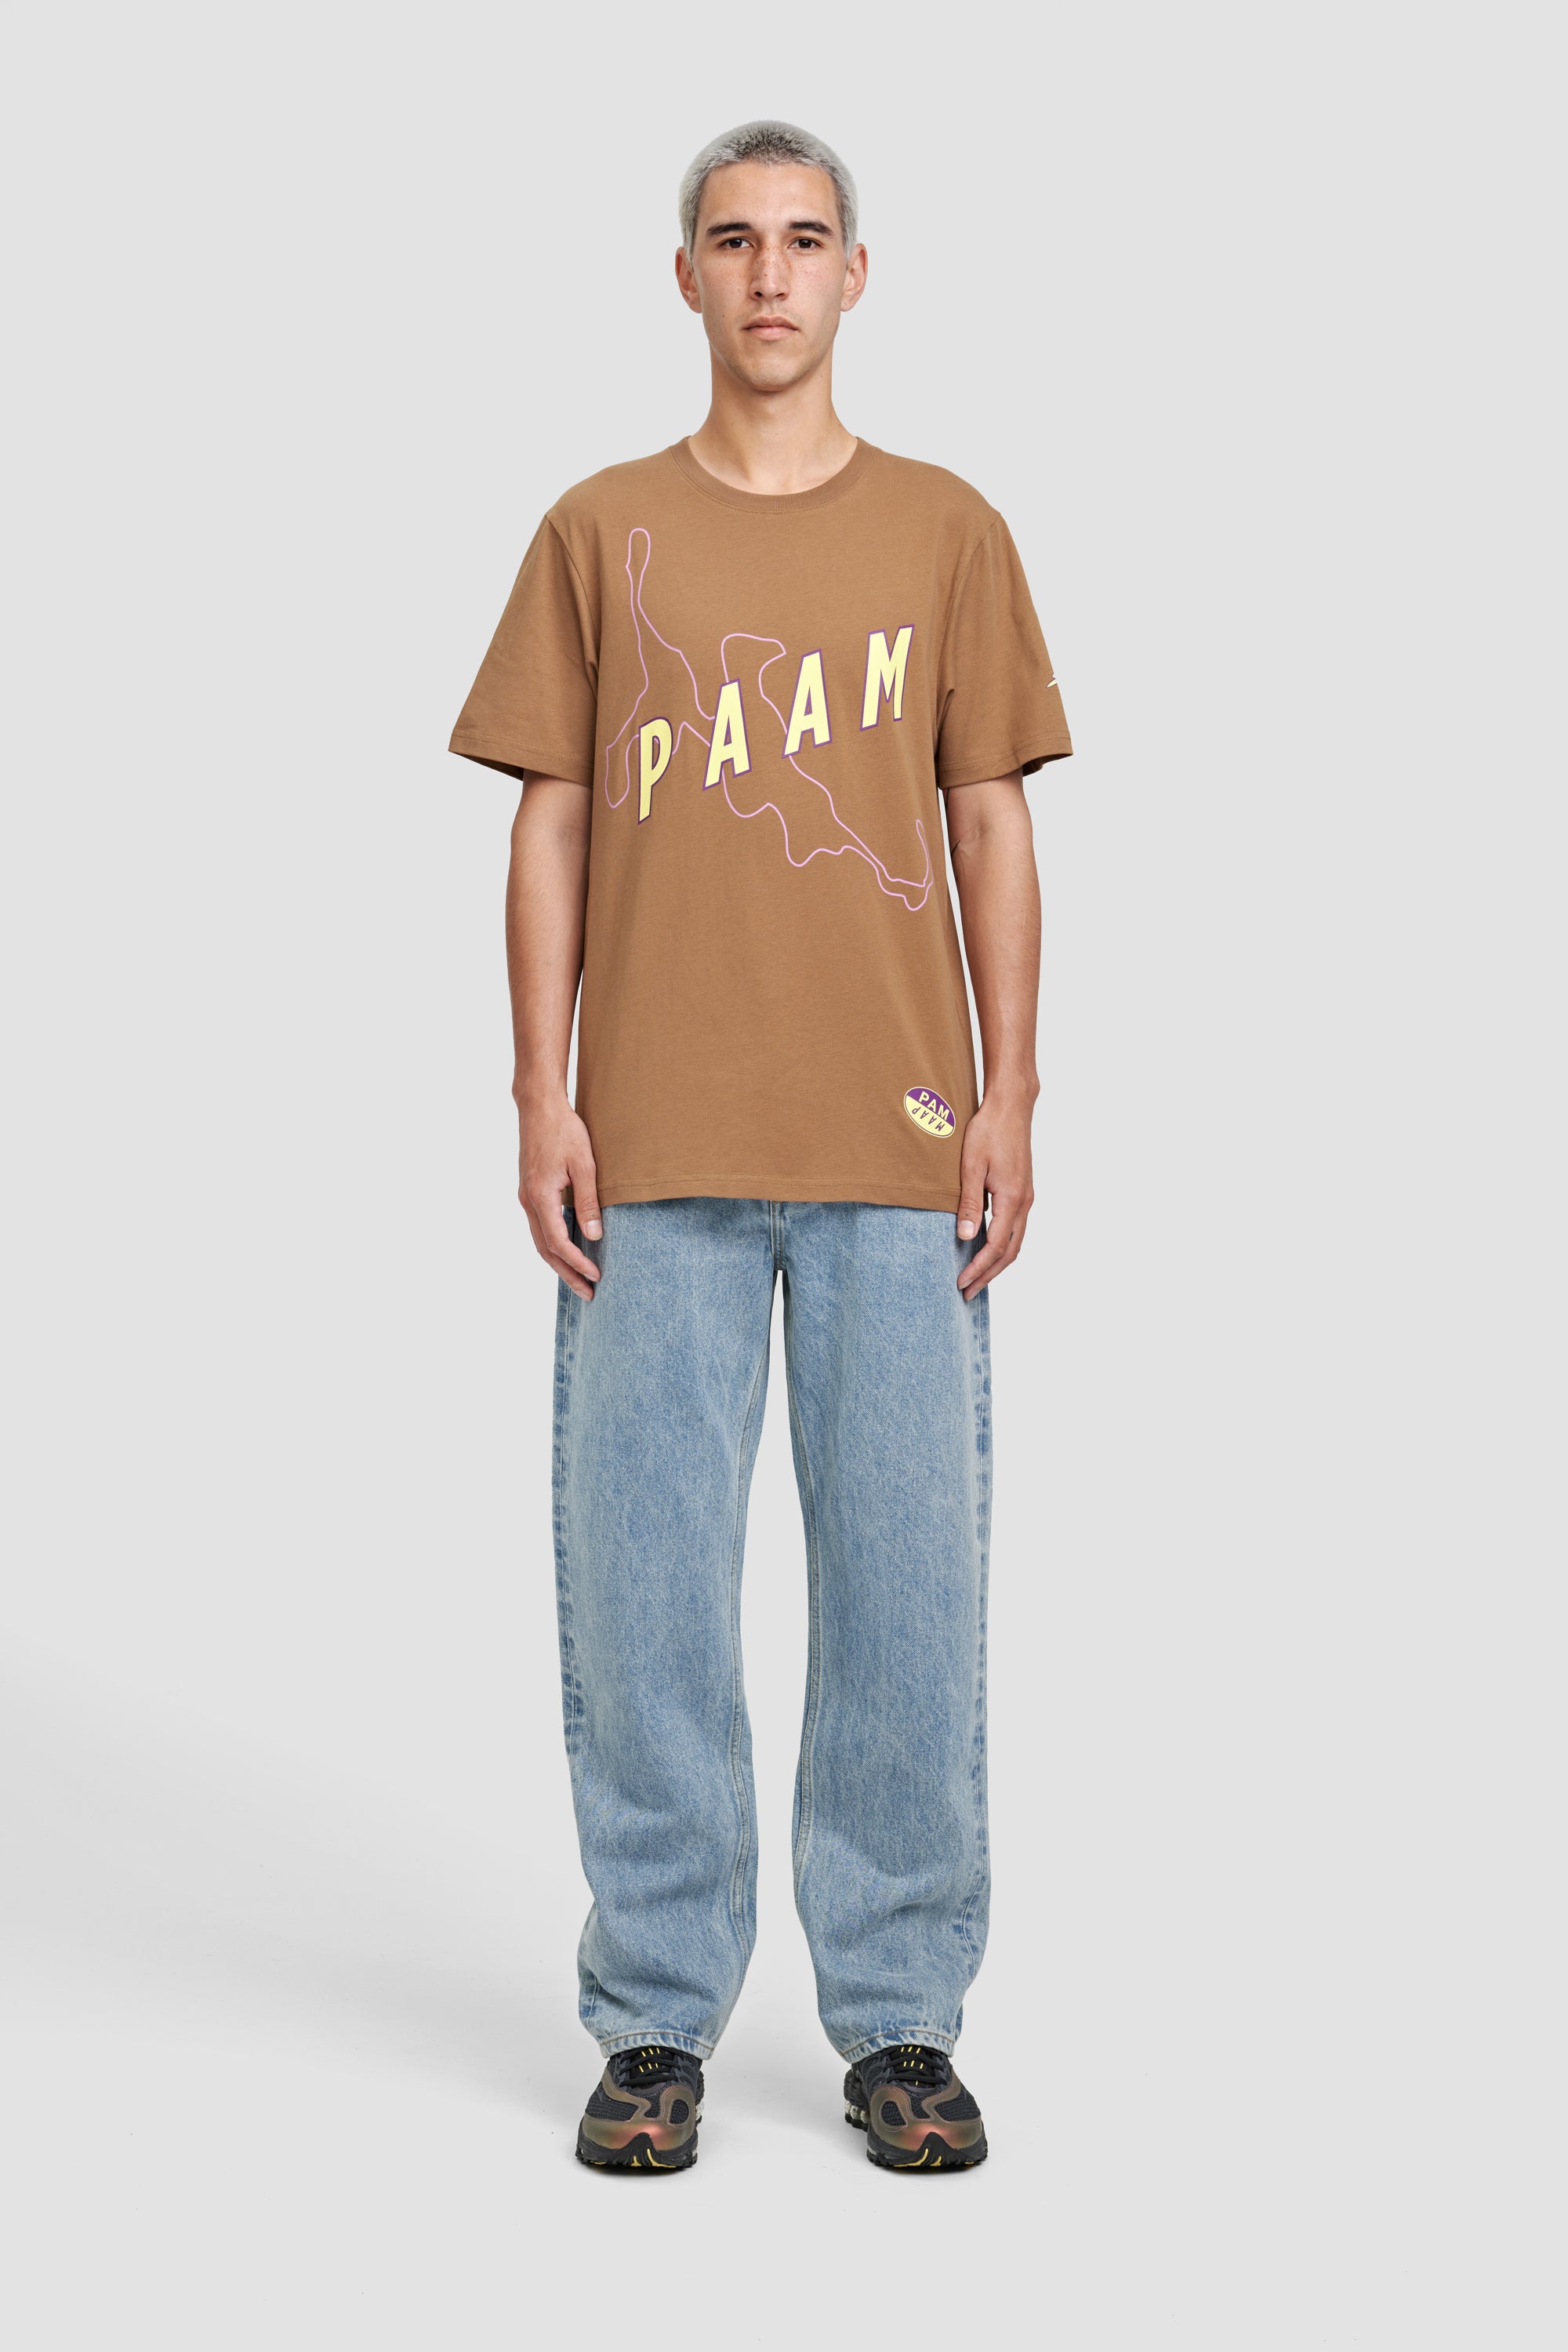 The PAAM 1.5 SS TEE  available online with global shipping, and in PAM Stores Melbourne and Sydney.